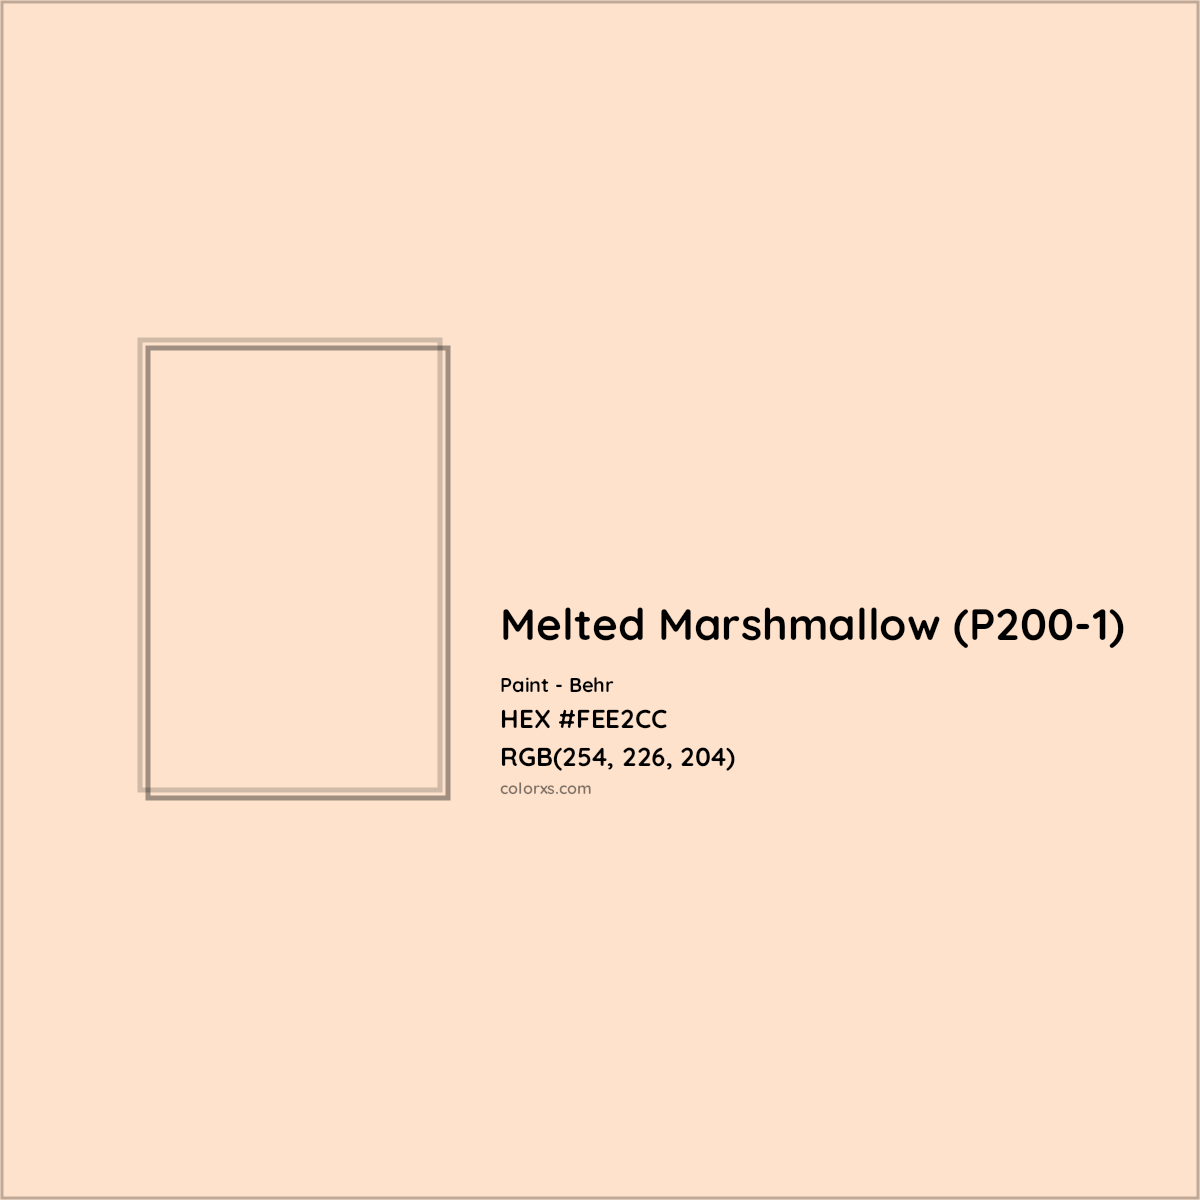 HEX #FEE2CC Melted Marshmallow (P200-1) Paint Behr - Color Code